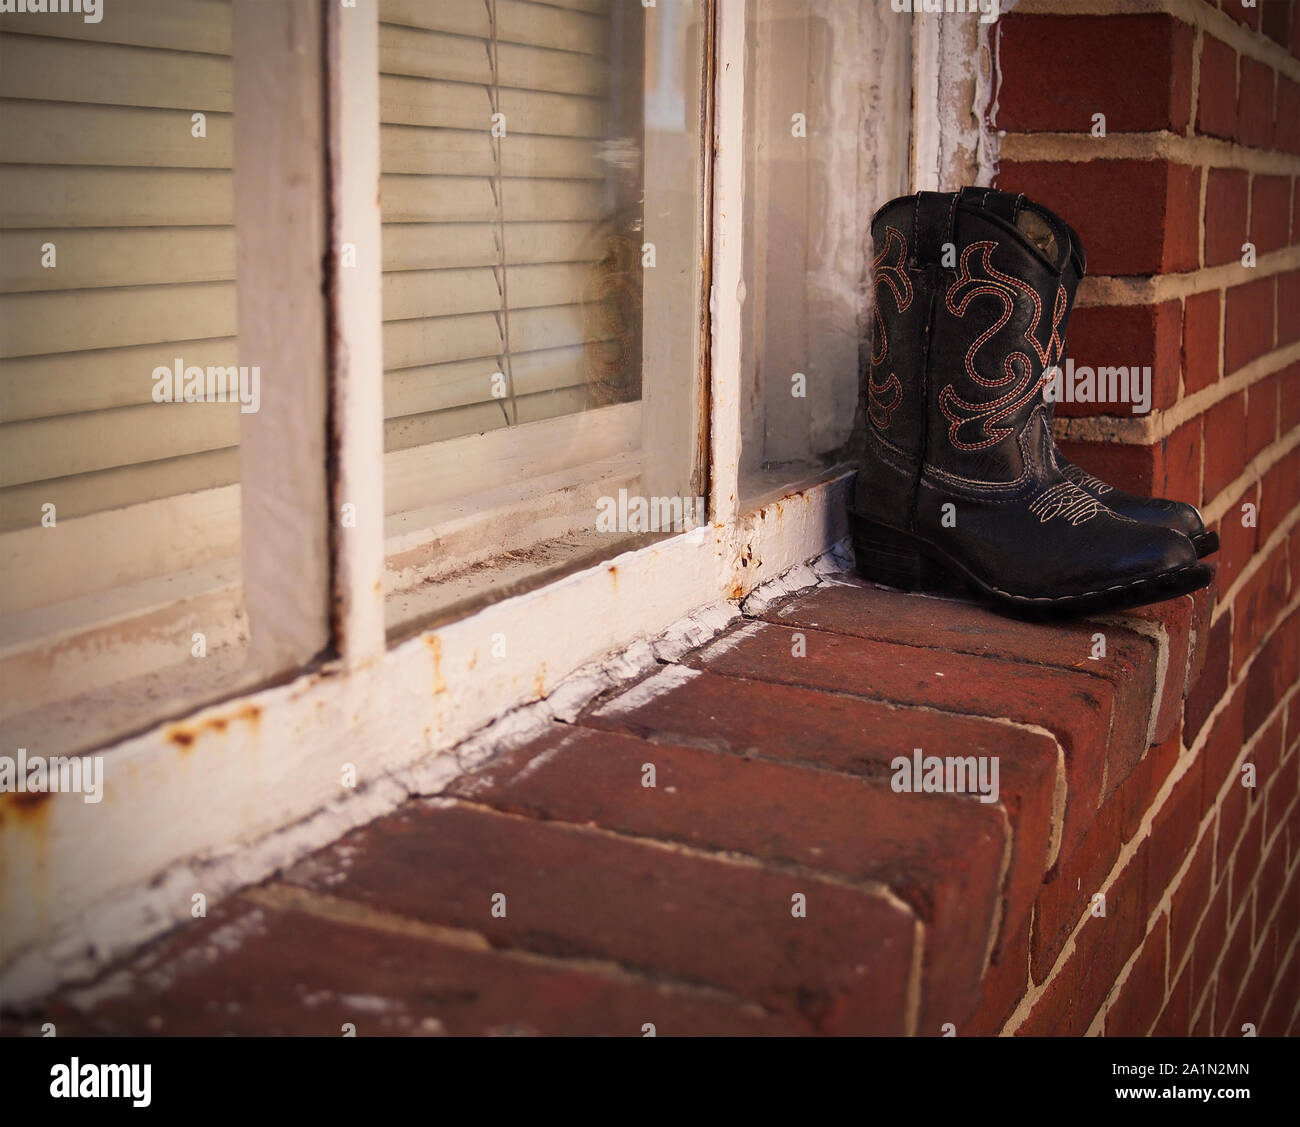 A pair of black western boots with embroidery stitching rests on a brick ledge outside a home. Stock Photo